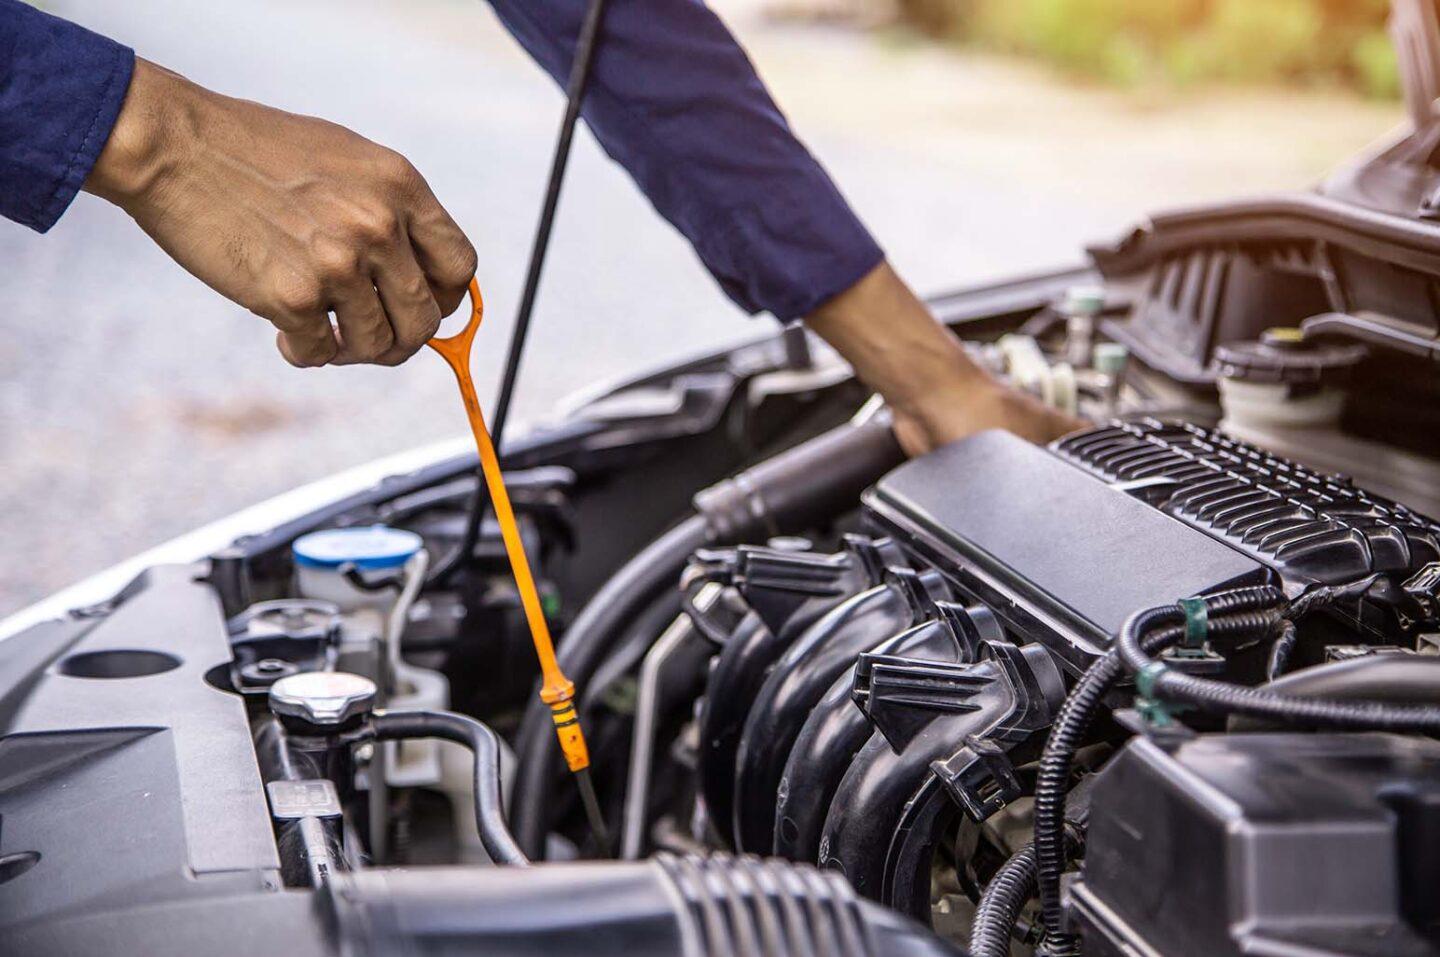 Decoding the Tell-Tale Signs That Your Car Needs a Tune-Up